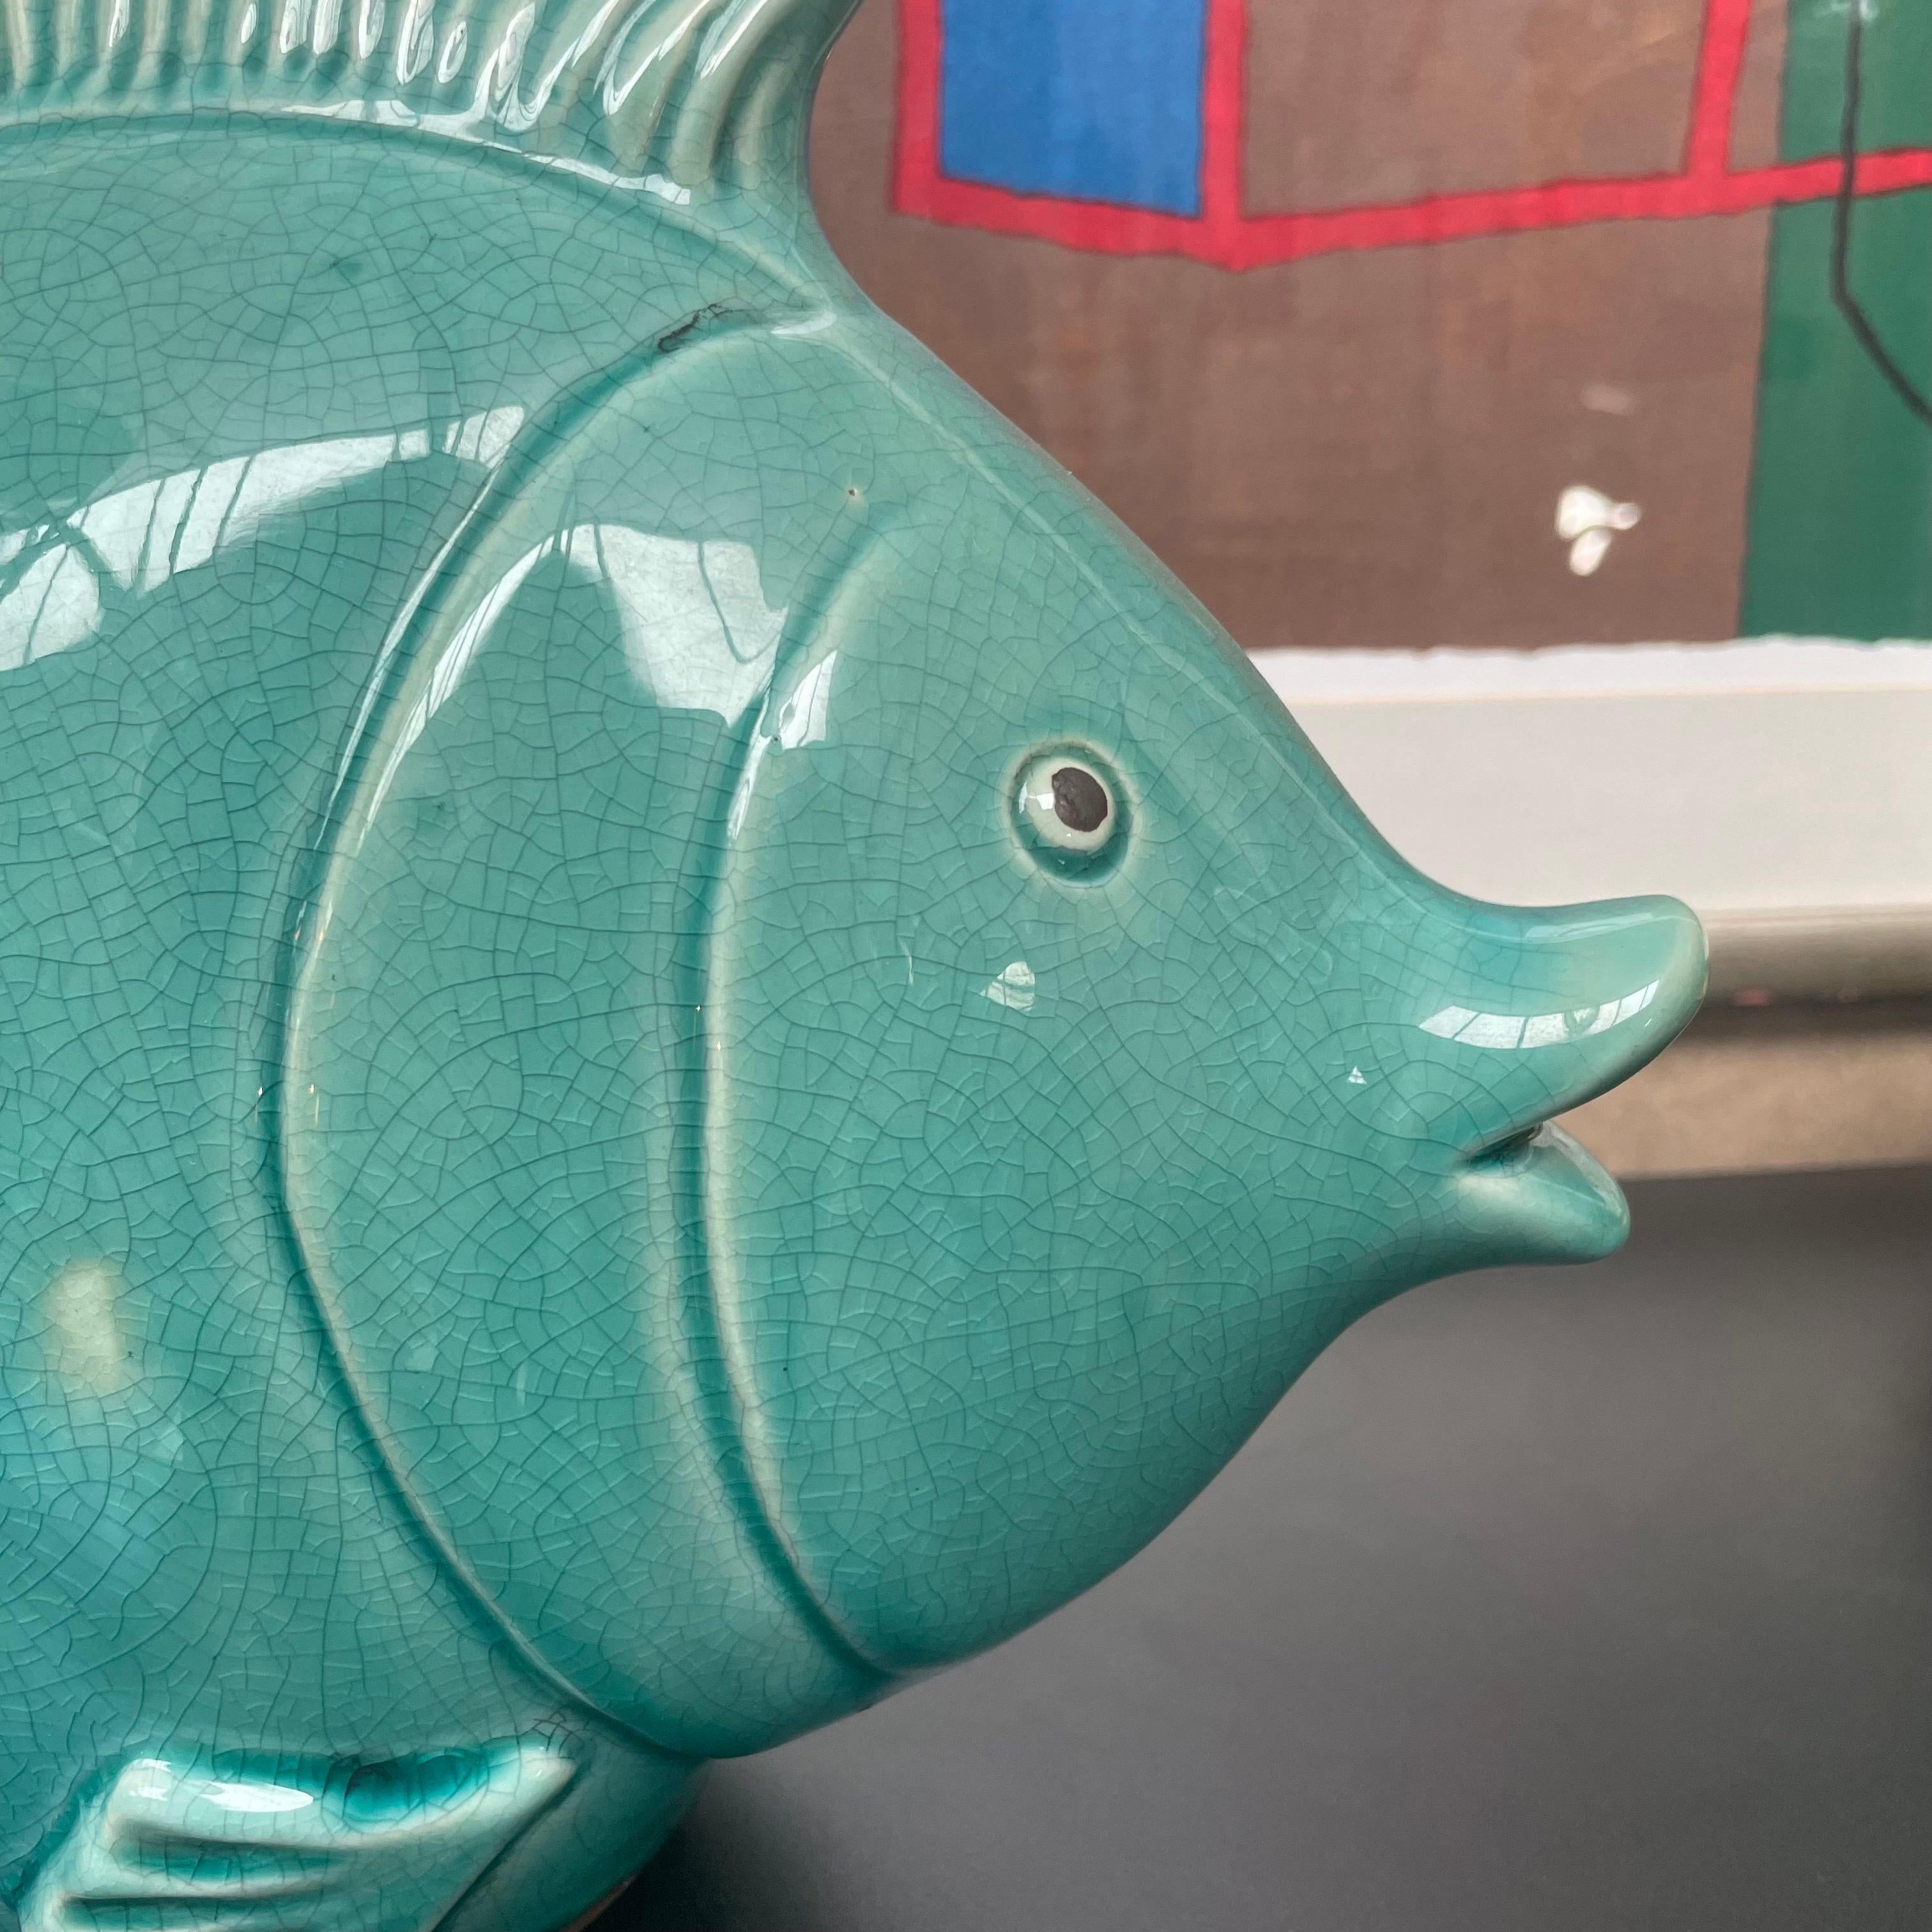 Decorative Fish in Glazed Ceramic, late 20th century.

Wonderful and fun decorative fish sculpture in glazed ceramic. Deep and interesting turquoise color and a playful yet elegant design. Due to the size and scale this is a great piece to show on a